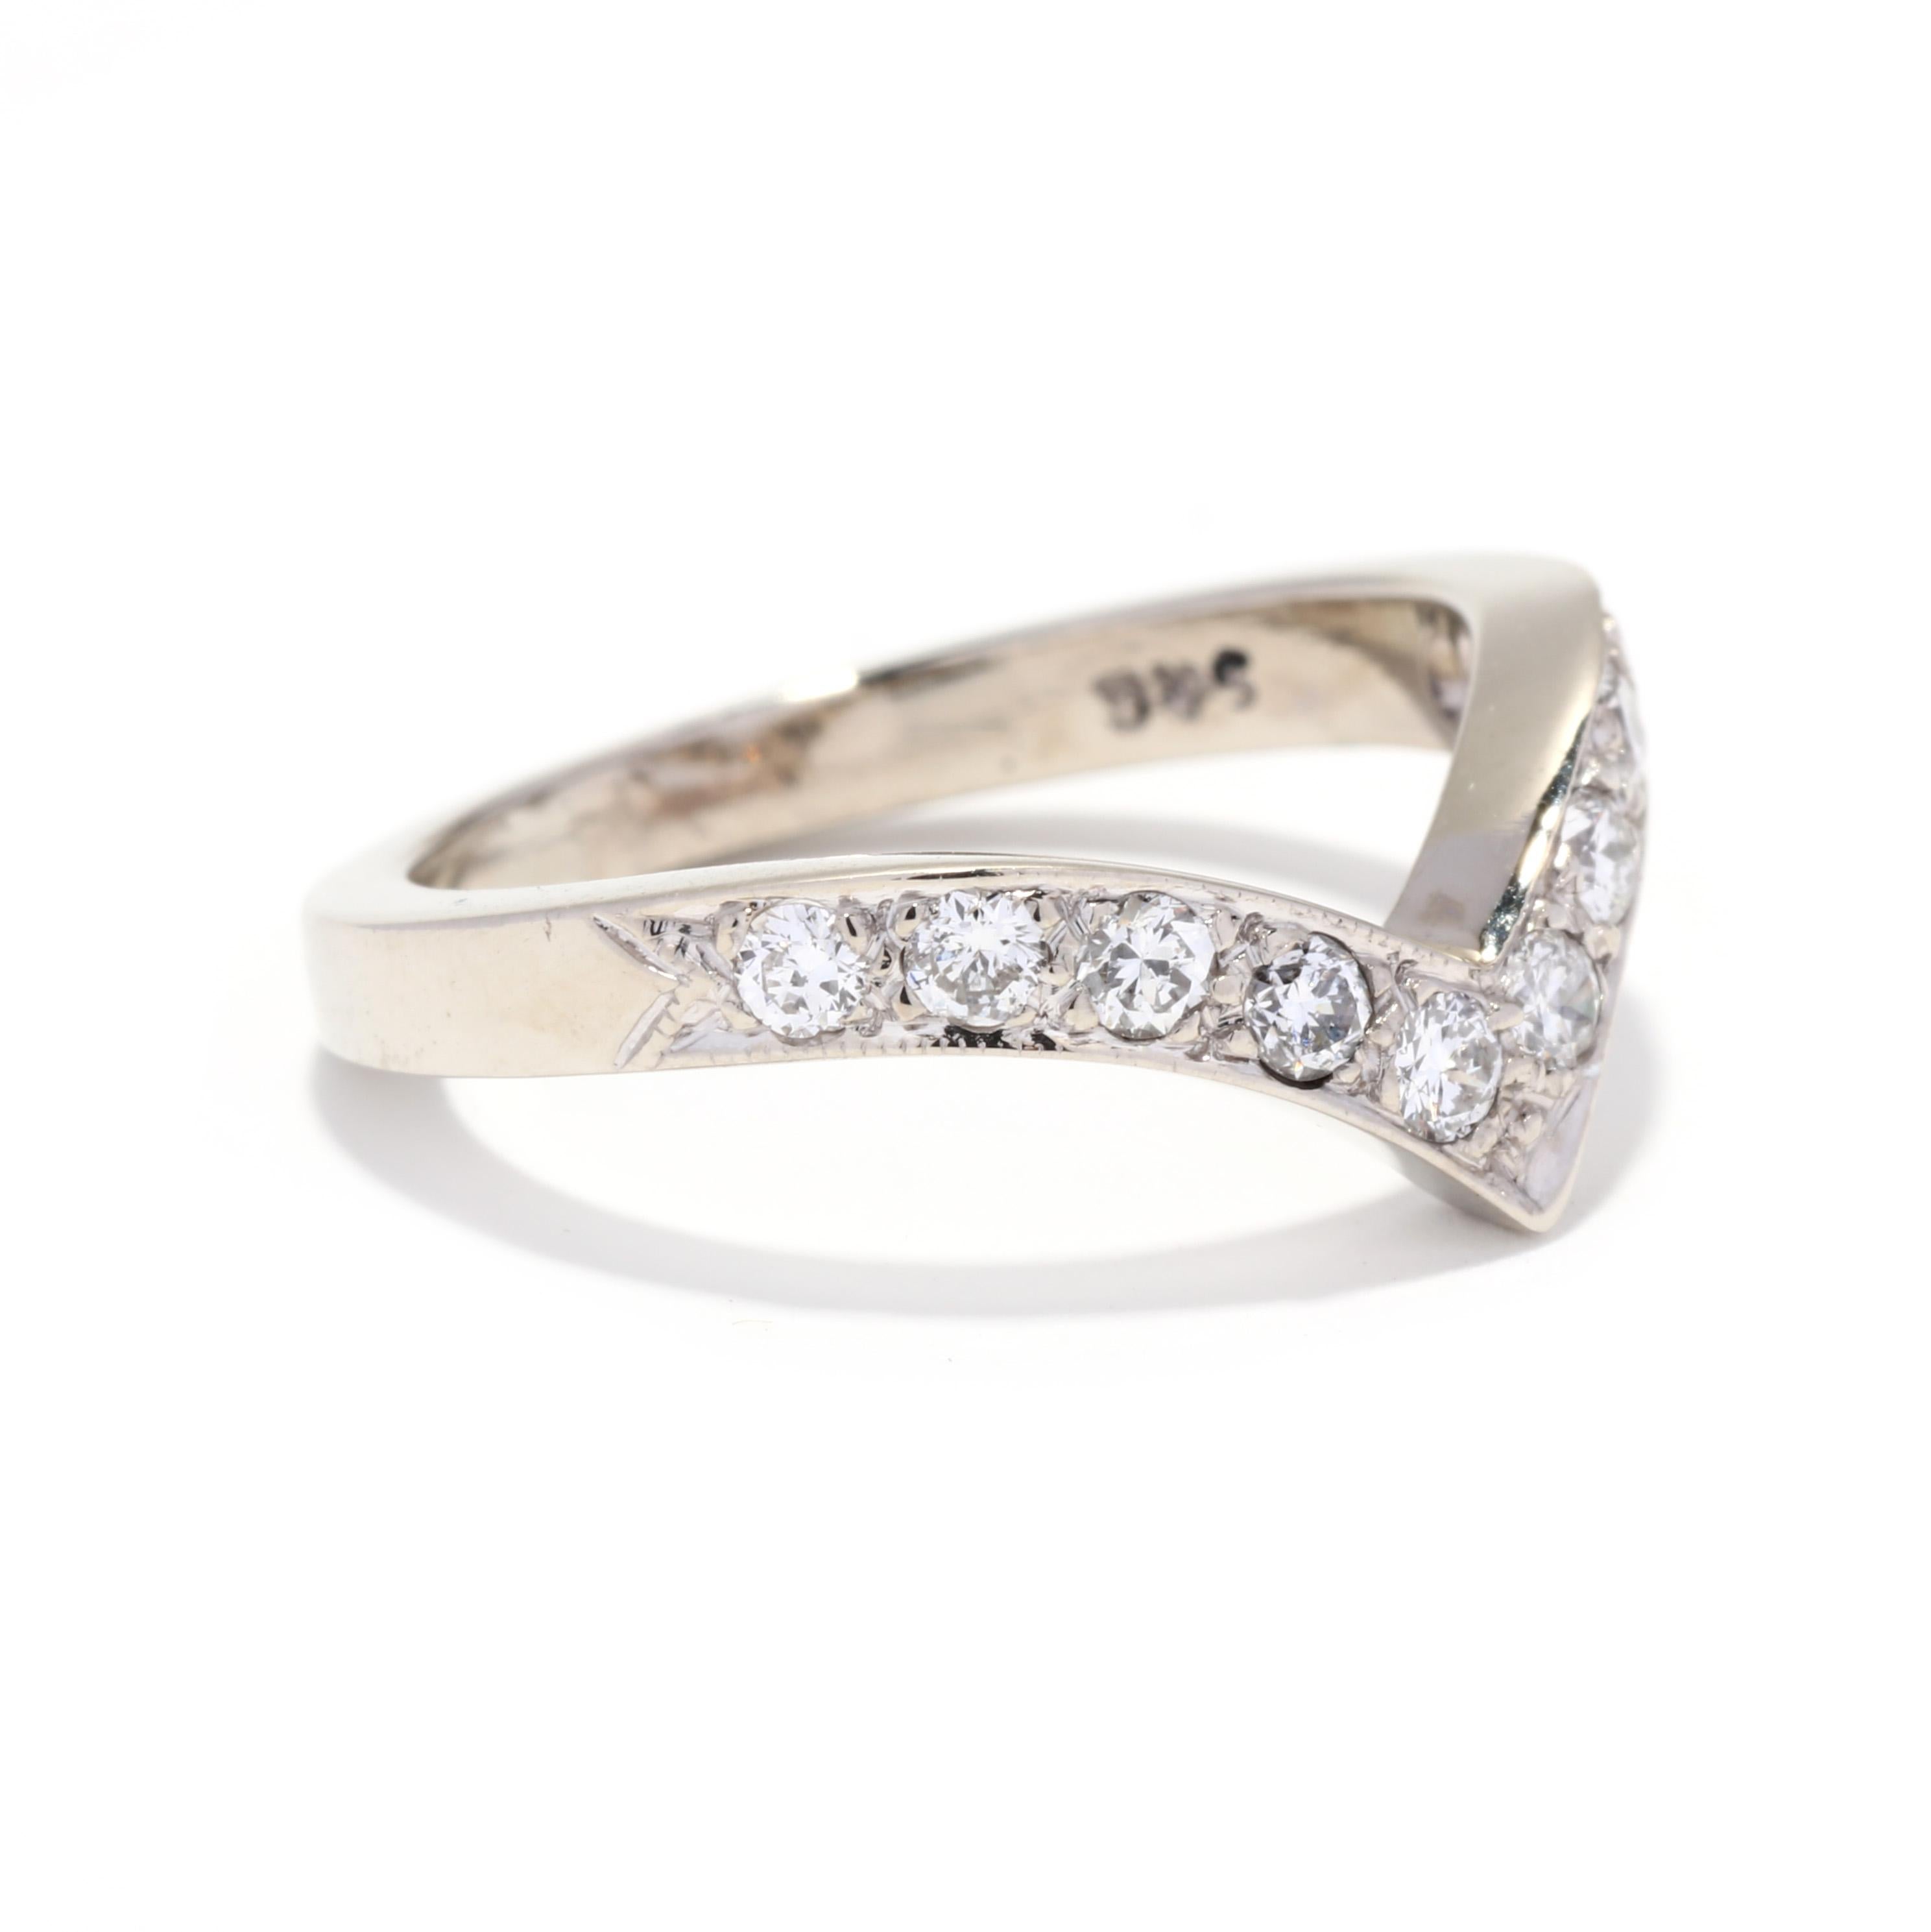 A vintage 14 karat white gold diamond V ring. This stackable ring features a curved V form with pavé set round brilliant cut diamonds weighing approximately .30 total carats and with a tapered band. Please note that one diamond has a small chip but